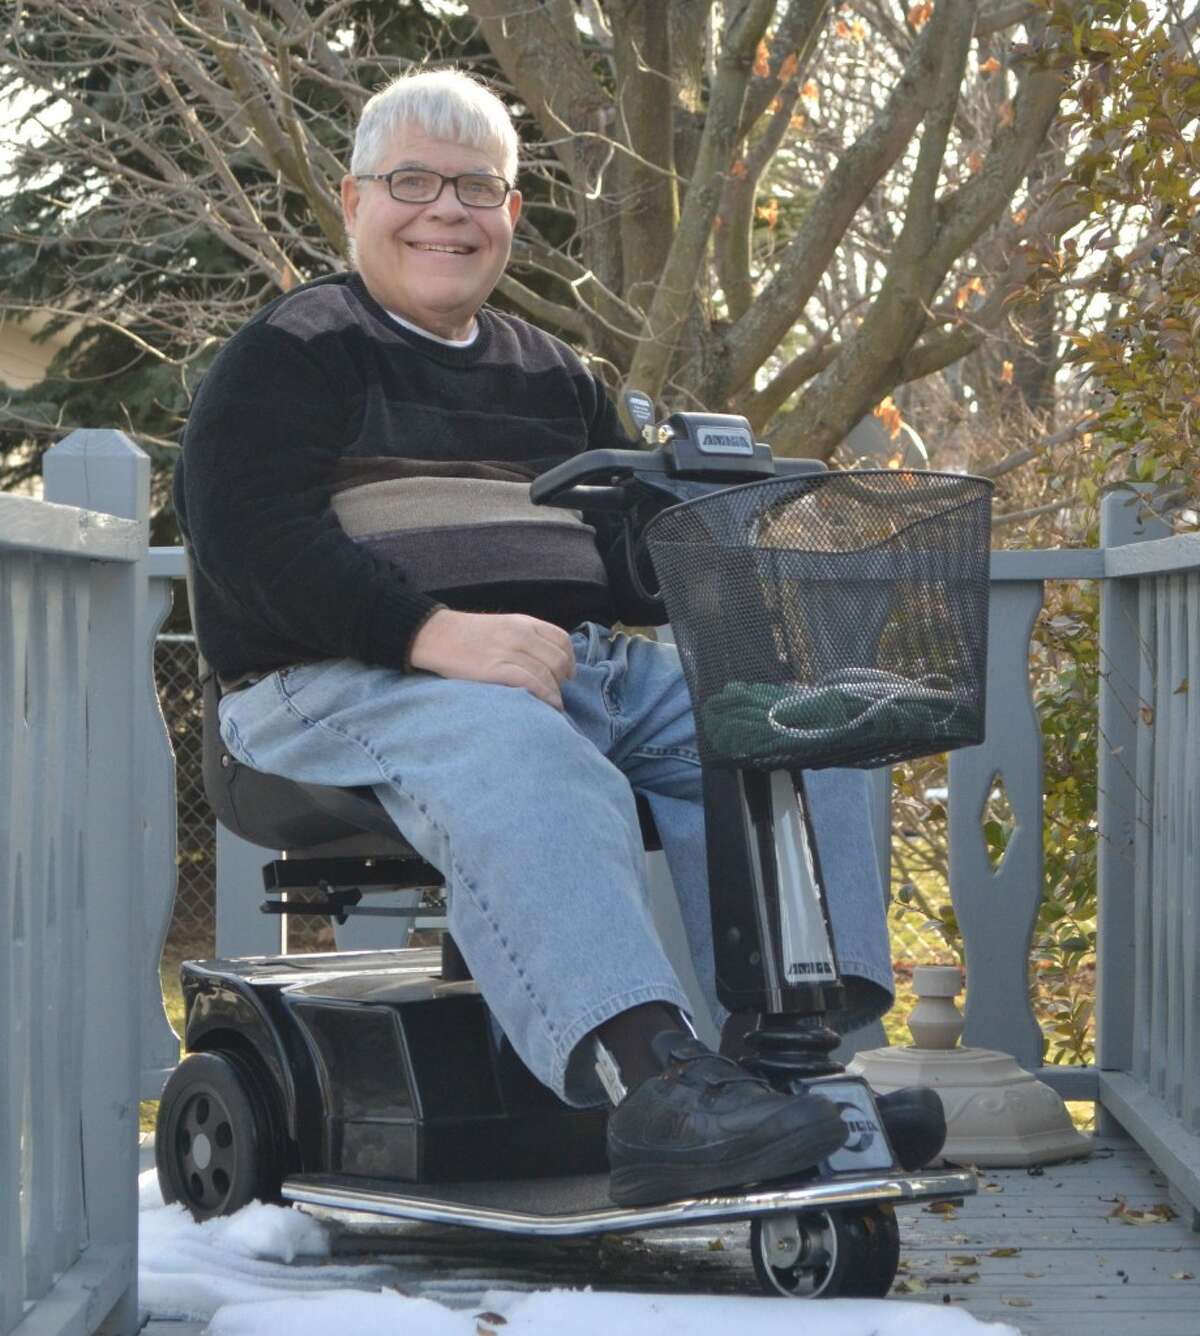 Richard Knechtges, founder and president of the Manistee County Chapter of the National Association of the Physically Handicapped (NAPH), sits on the back deck of his Manistee home. (Meg LeDuc/News Advocate)